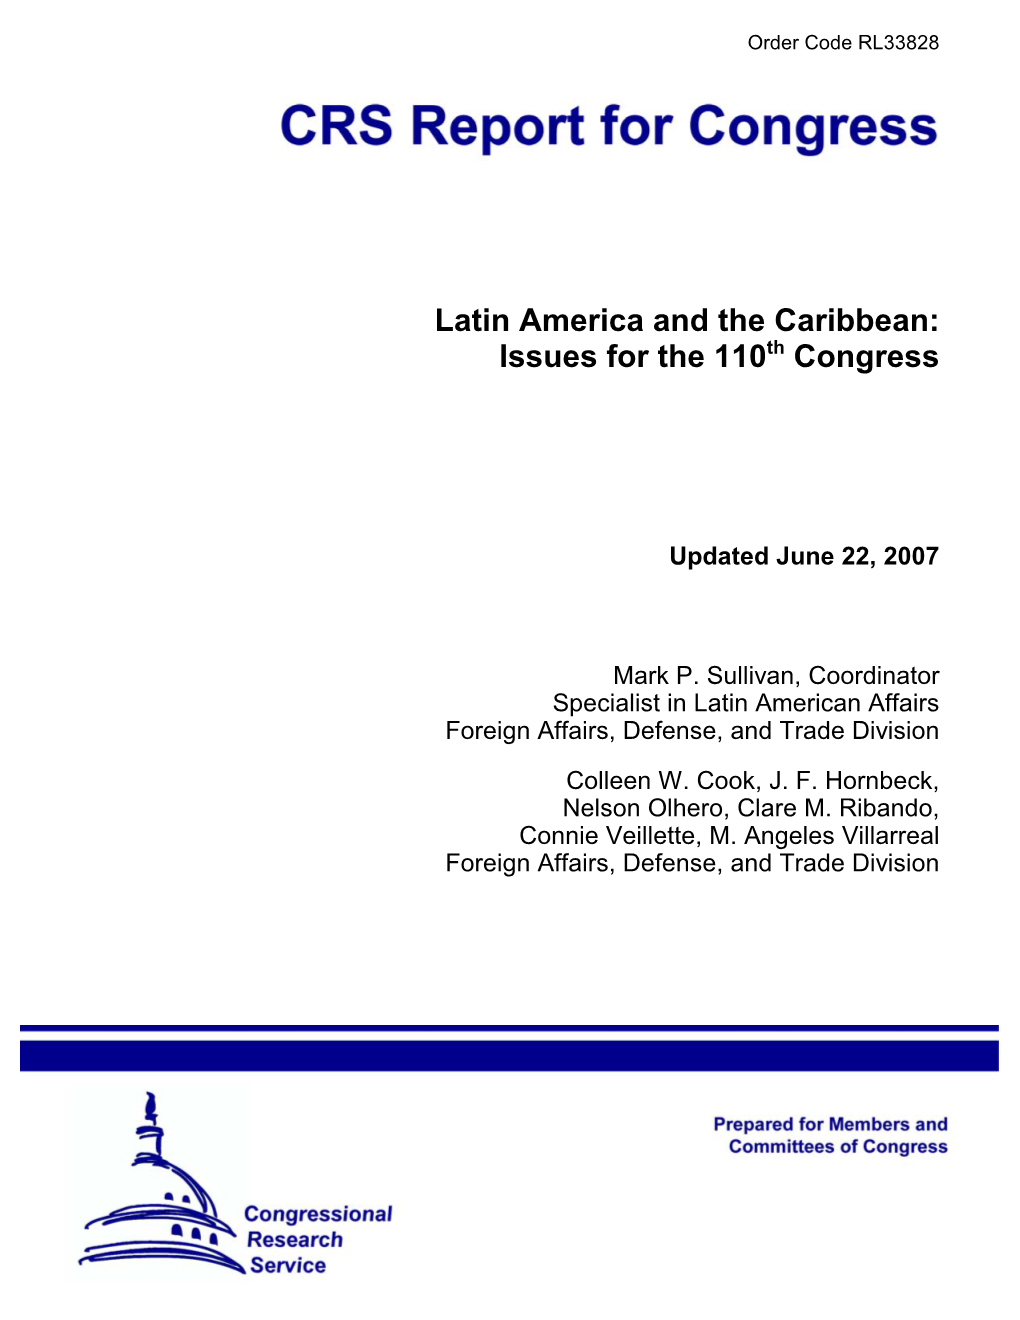 Latin America and the Caribbean: Issues for the 110Th Congress